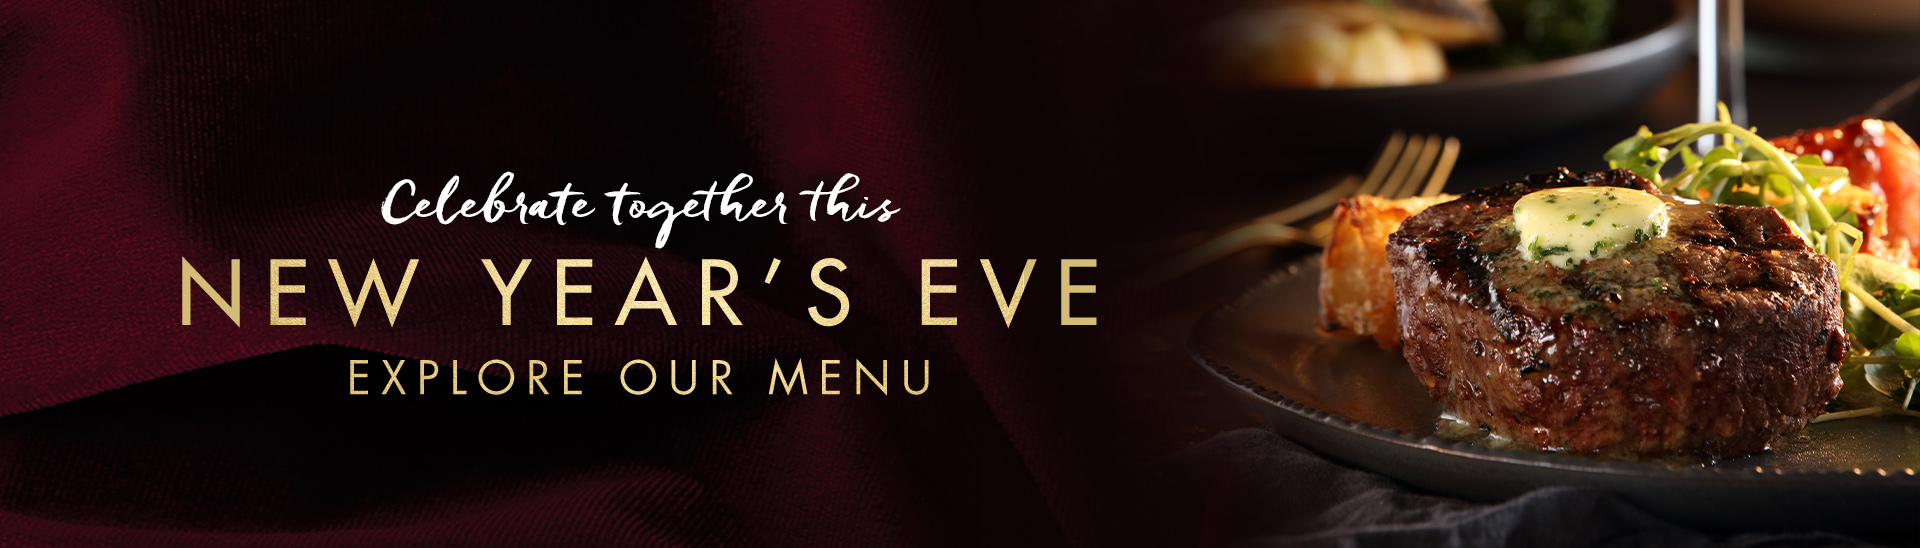 New Year’s eve menu at Miller & Carter Ainsdale 